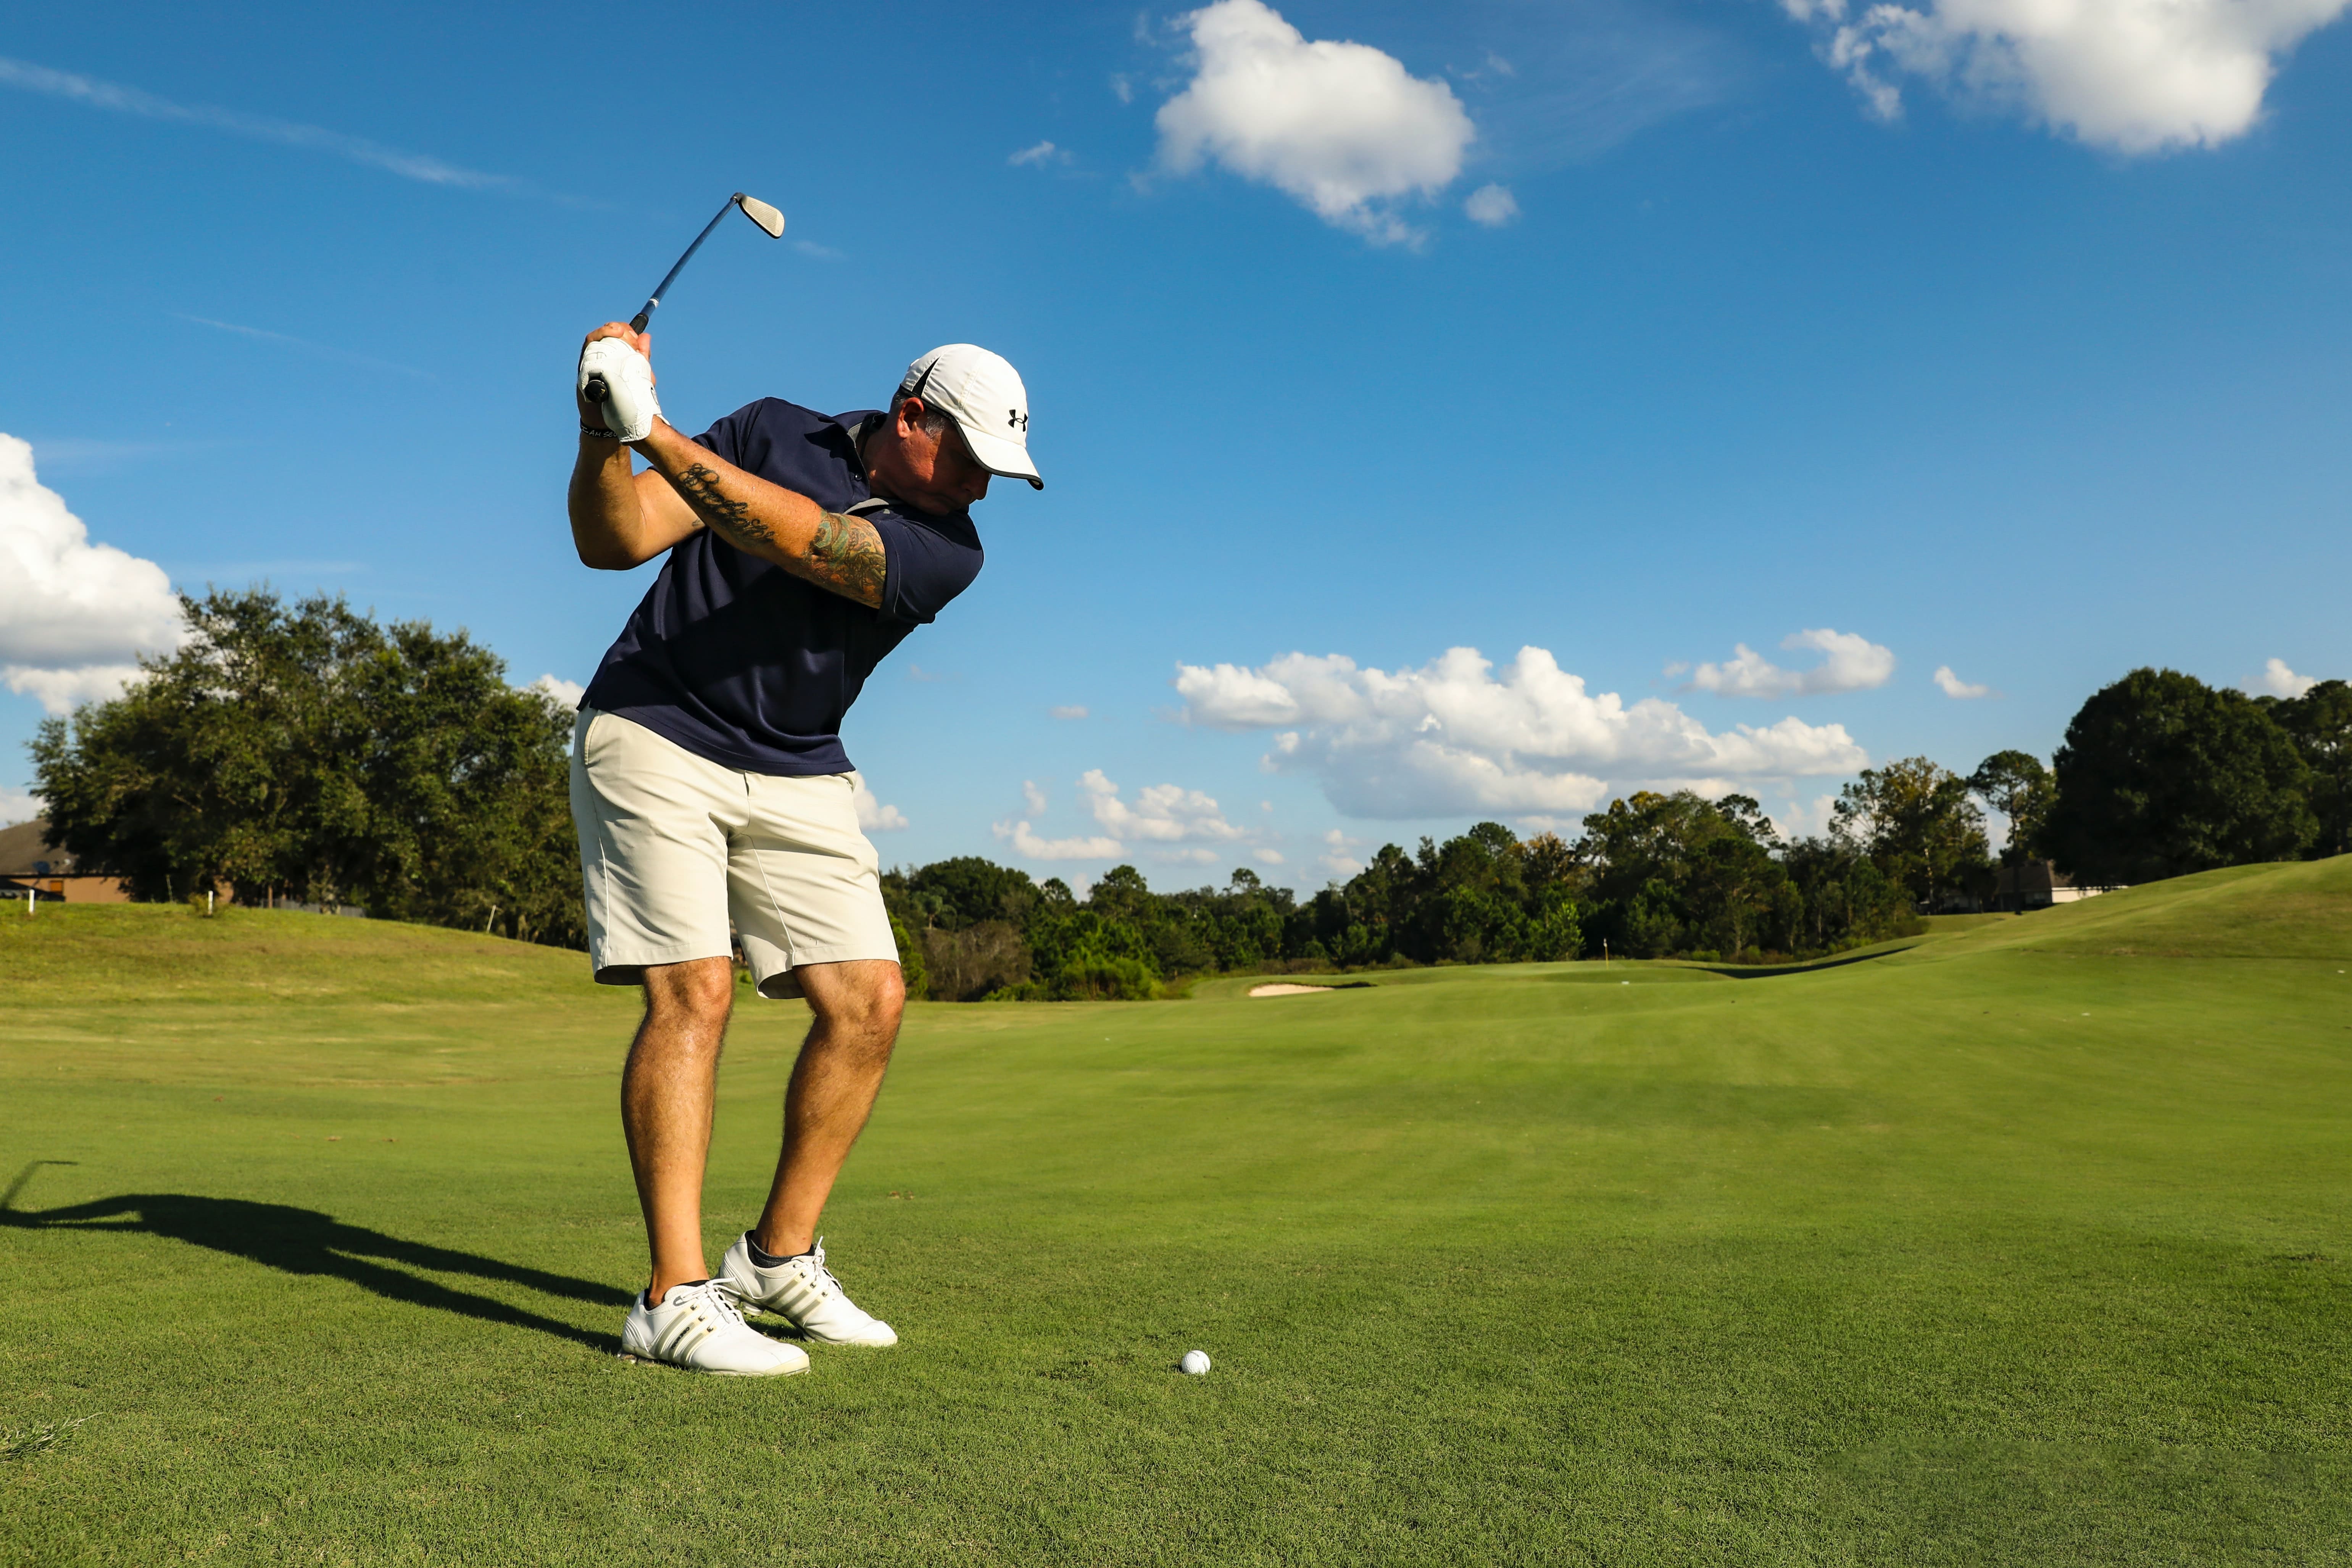 Award-winning golf academy provides private and group instruction for beginners, advanced, and PGA players.